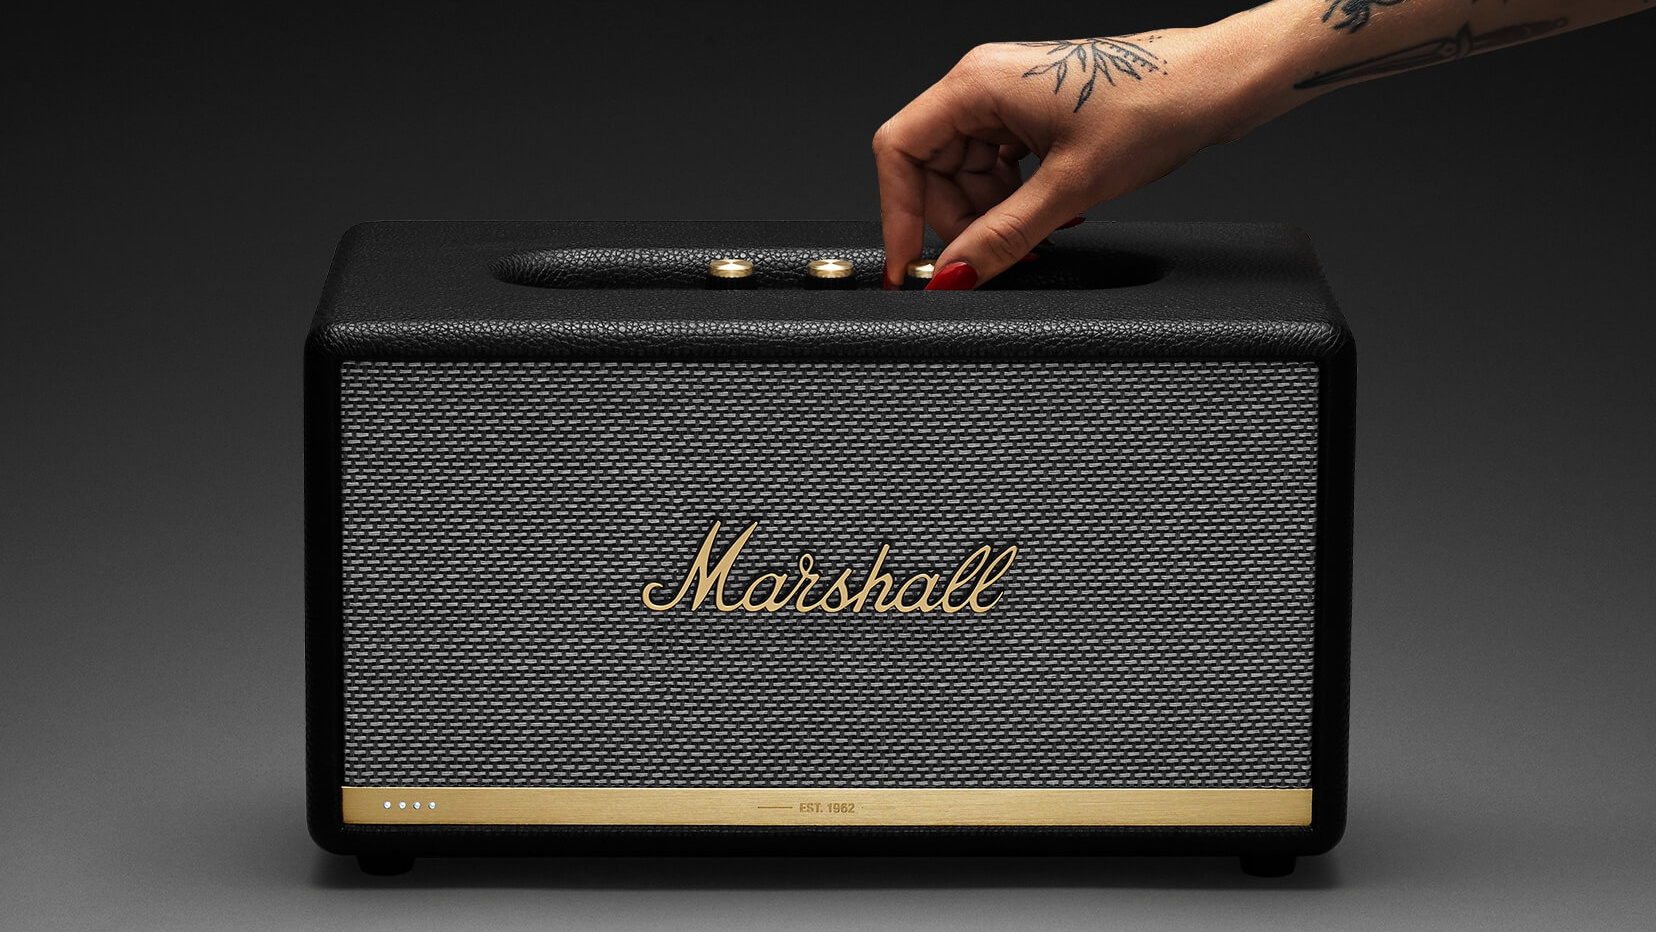 A product image of the Marshall Stanmore II Voice speaker against gradient background wtih a female hand turning one of the dials.